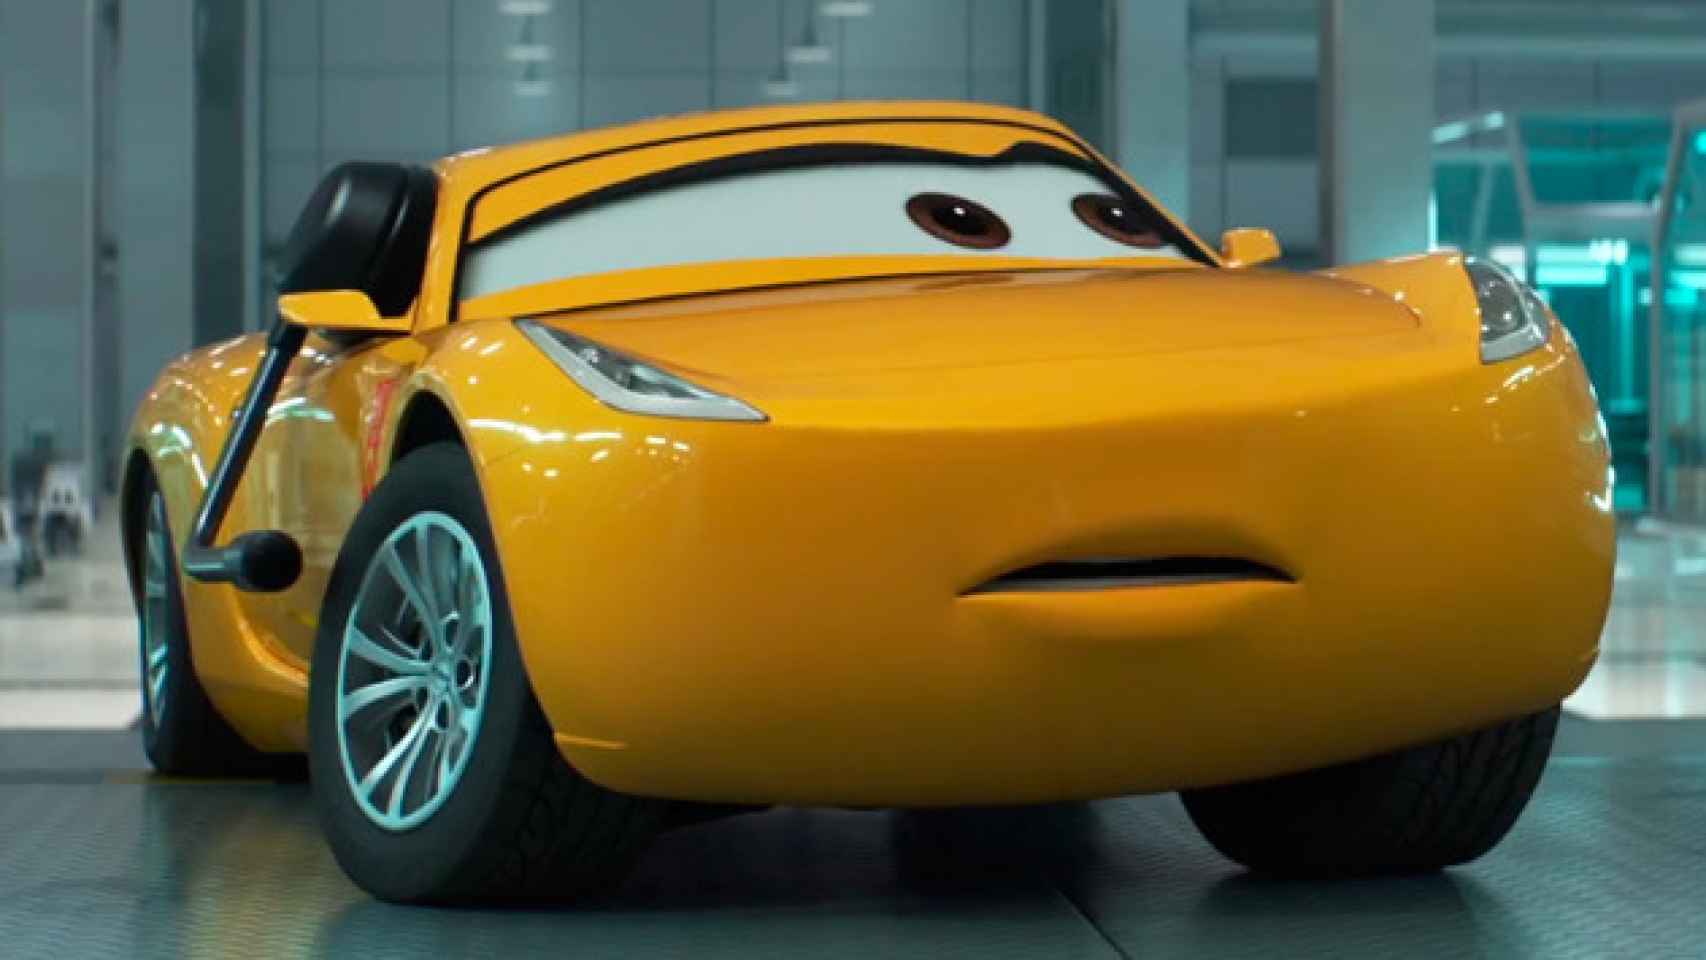 Cars 3 Coches Personajes - Rayo McQueen.